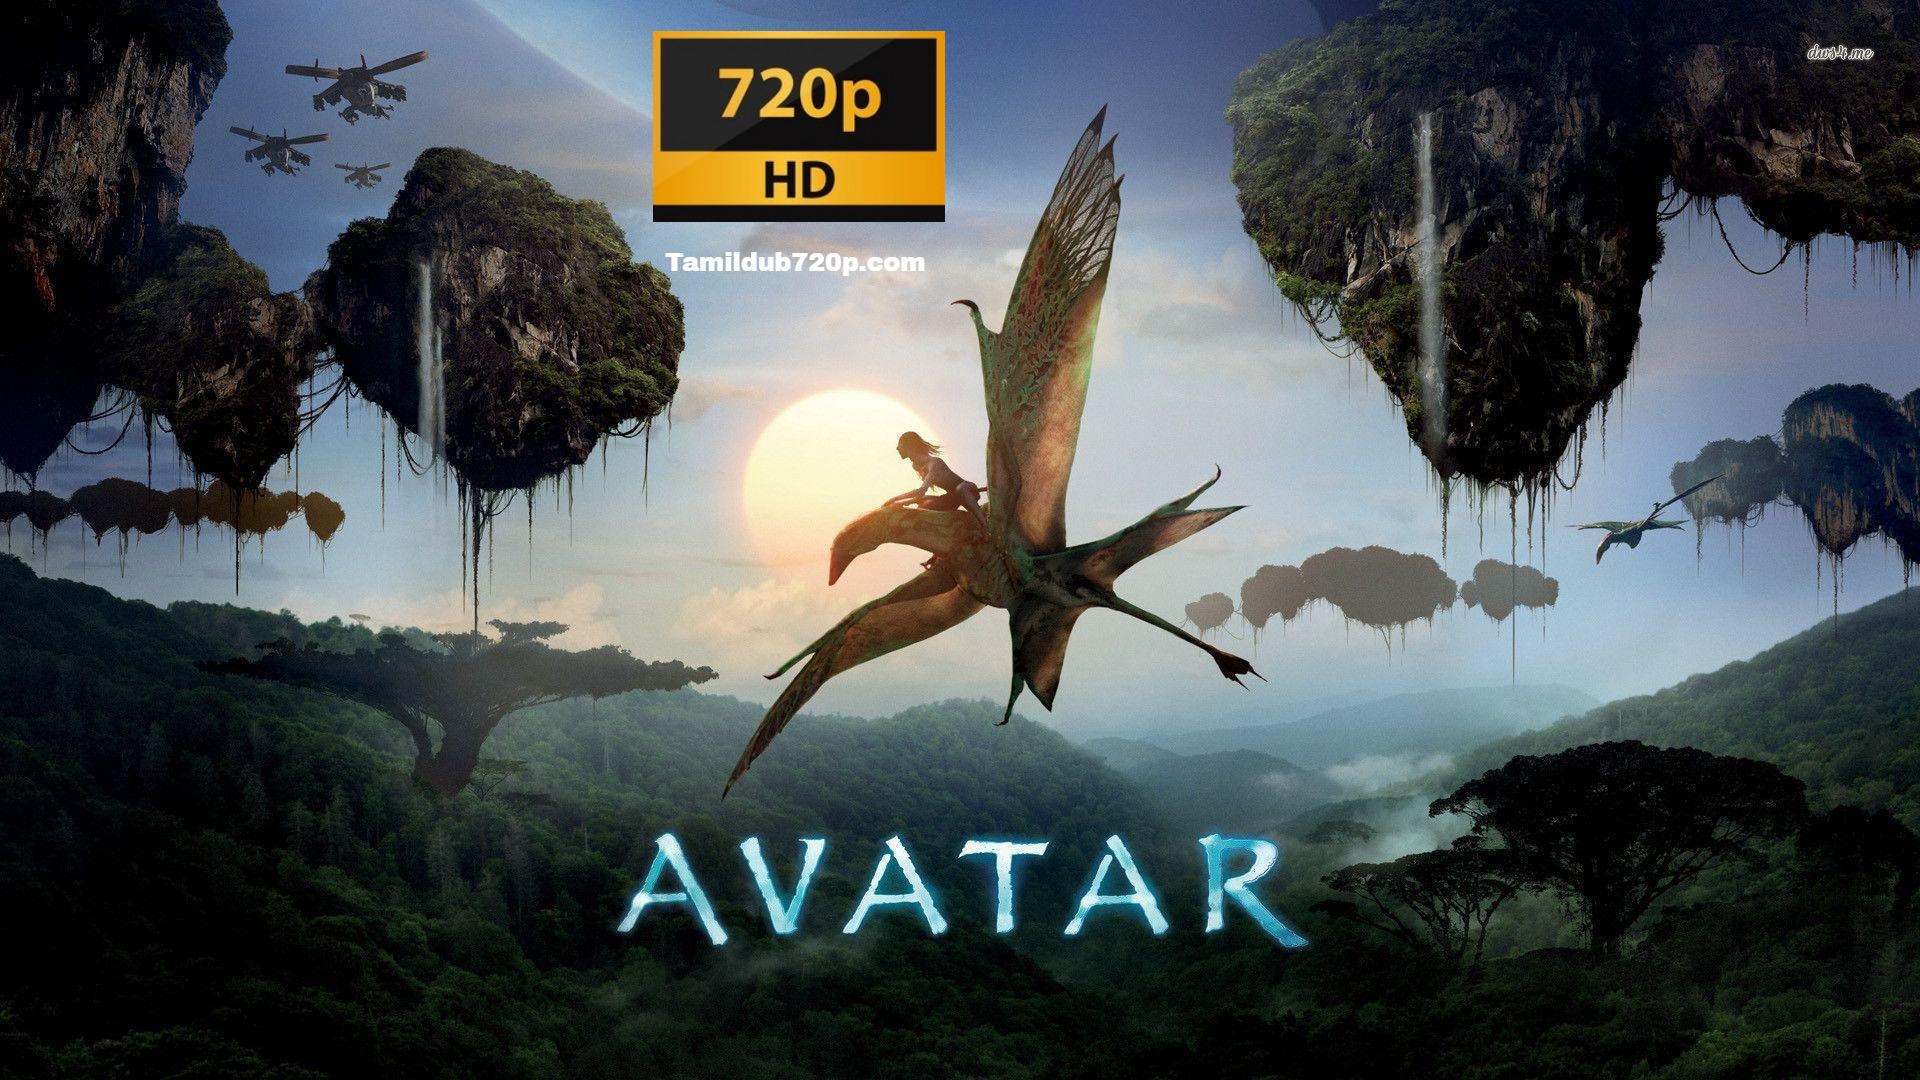 Avatar (2009) Extended BluRay 1080p / 720p Tamil Dubbed Watch or Download